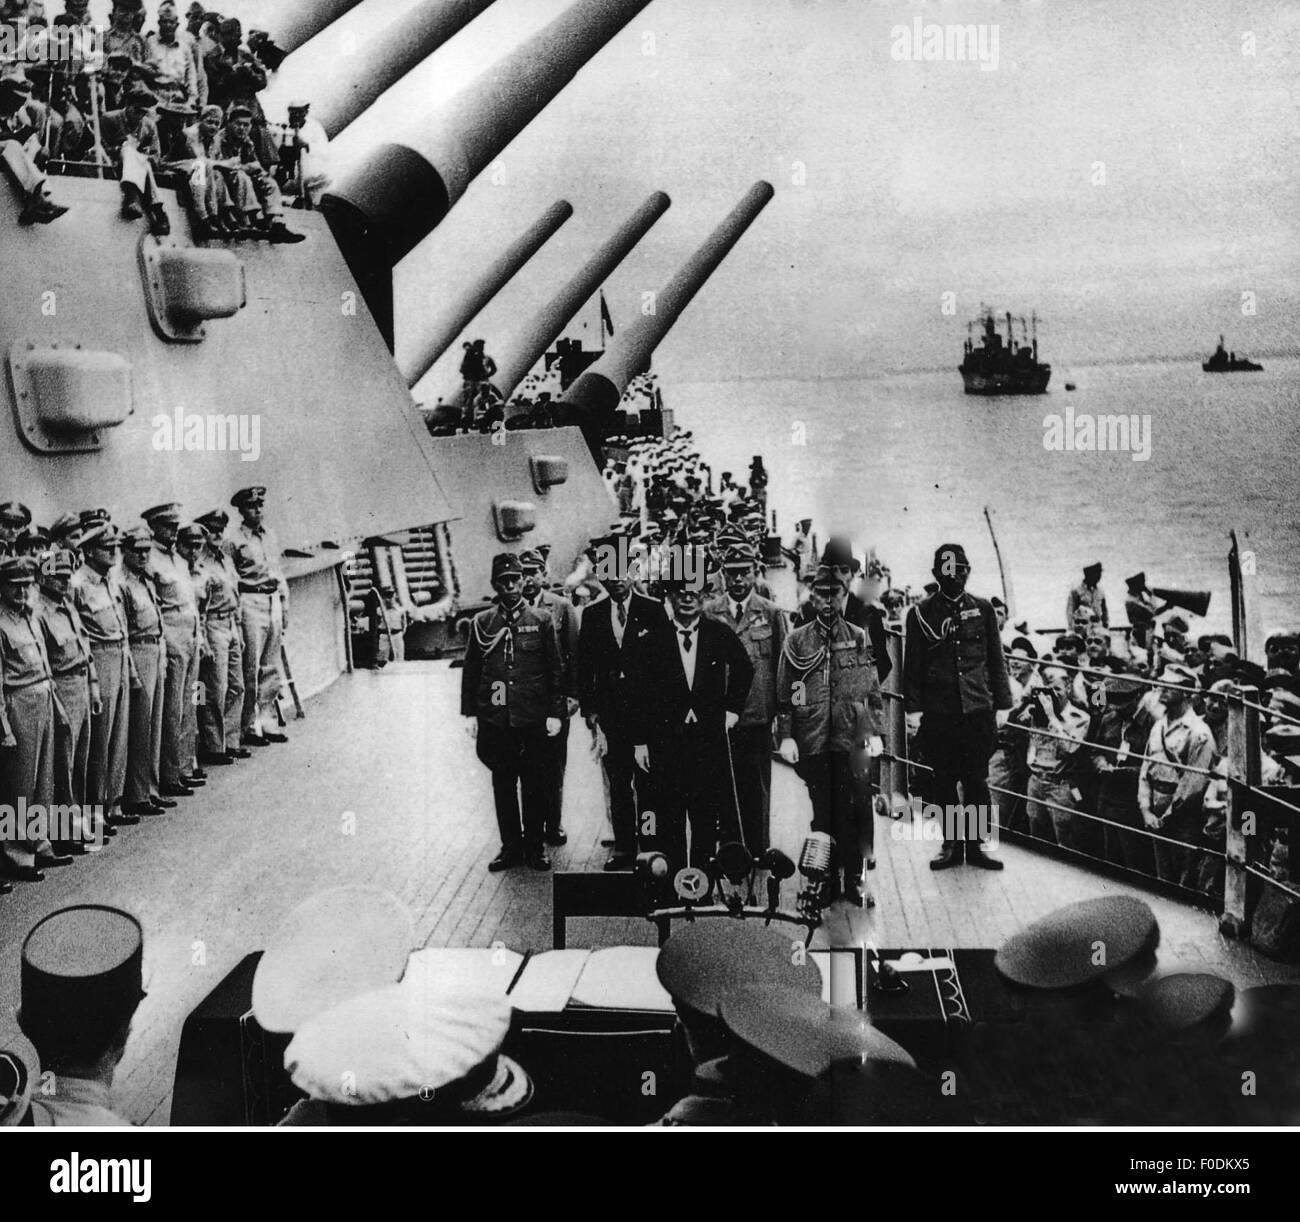 (150813) -- BEIJING, Aug. 13, 2015 (Xinhua) -- File photo taken on Sept. 2, 1945 shows Japan's surrender ceremony aboard the United States Navy battleship USS Missouri anchored in Tokyo Bay.     On Aug. 15, 1945, Japanese Emperor Hirohito delivered a recorded radio address to the nation, announcing the surrender of Japan in World War II, one day after Japan declared its acceptance of the provisions of the Potsdam Proclamation jointly issued by China, the United States and Britain on July 26, 1945, with the Soviet Union joining later. The proclamation, which radicated Japan's crimes of aggressi Stock Photo